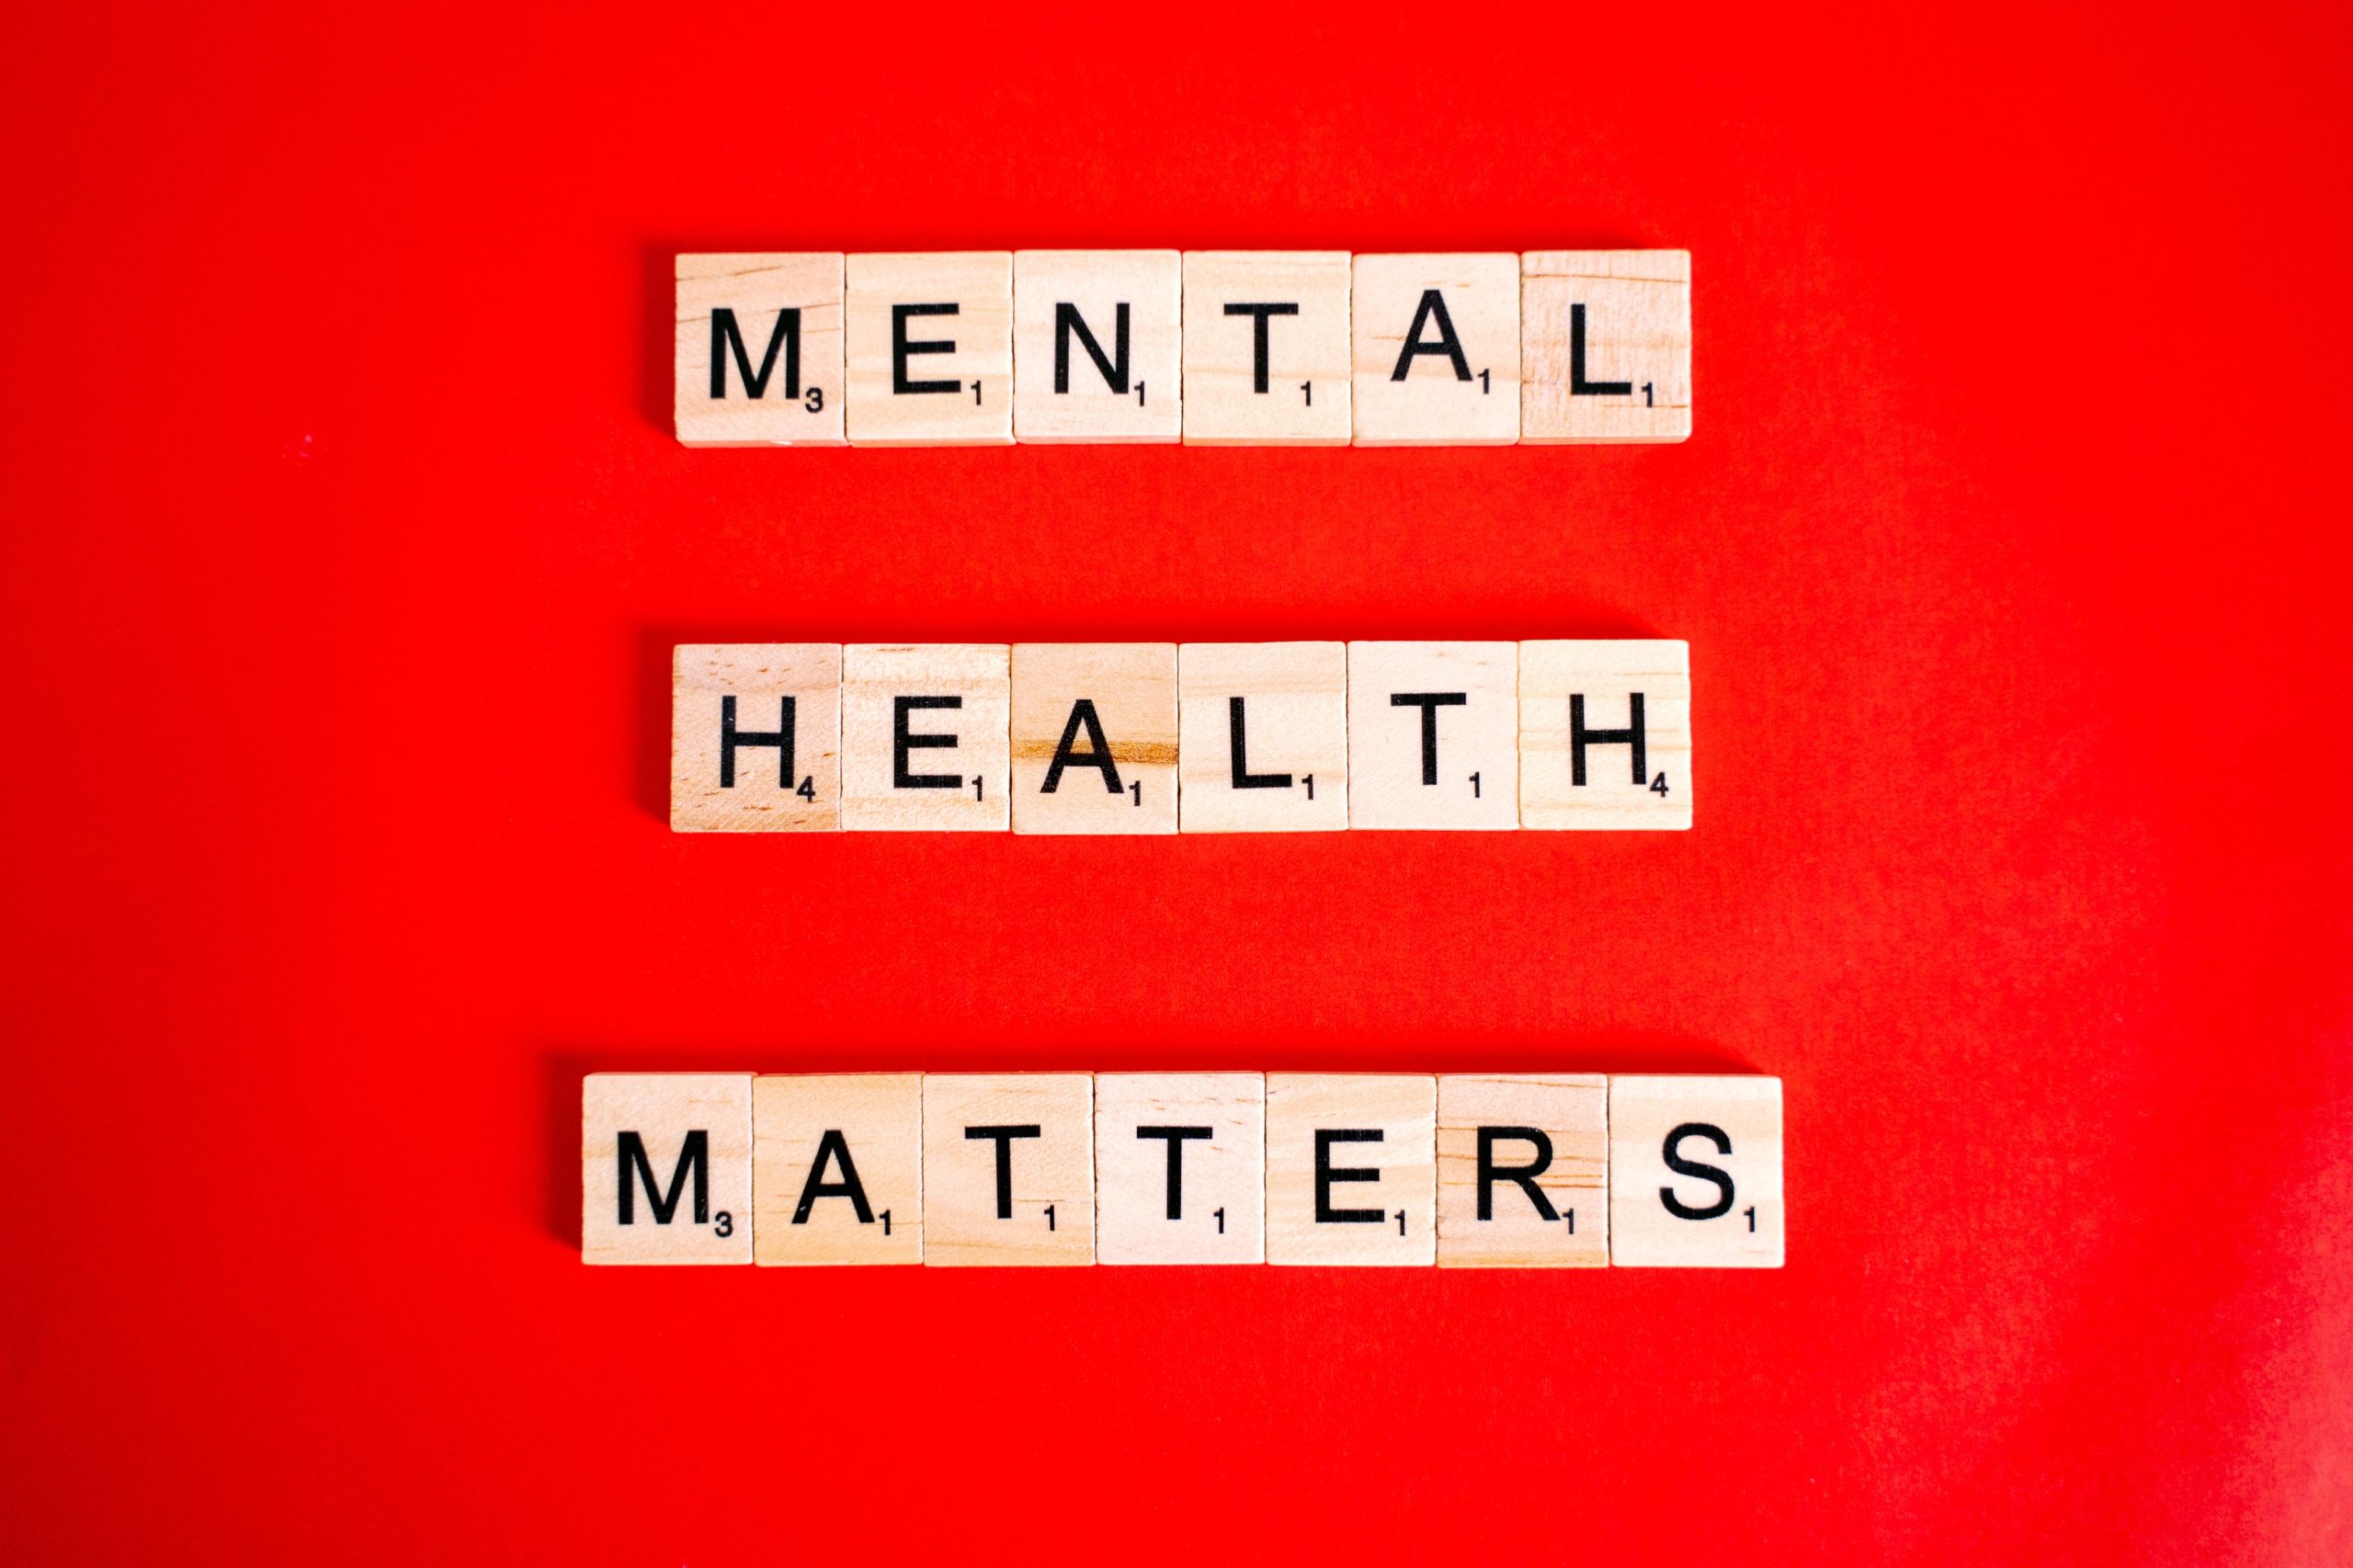 “Mental Health Matters” is spelled out using tiles from a Scrabble board. Behind it is a red background.